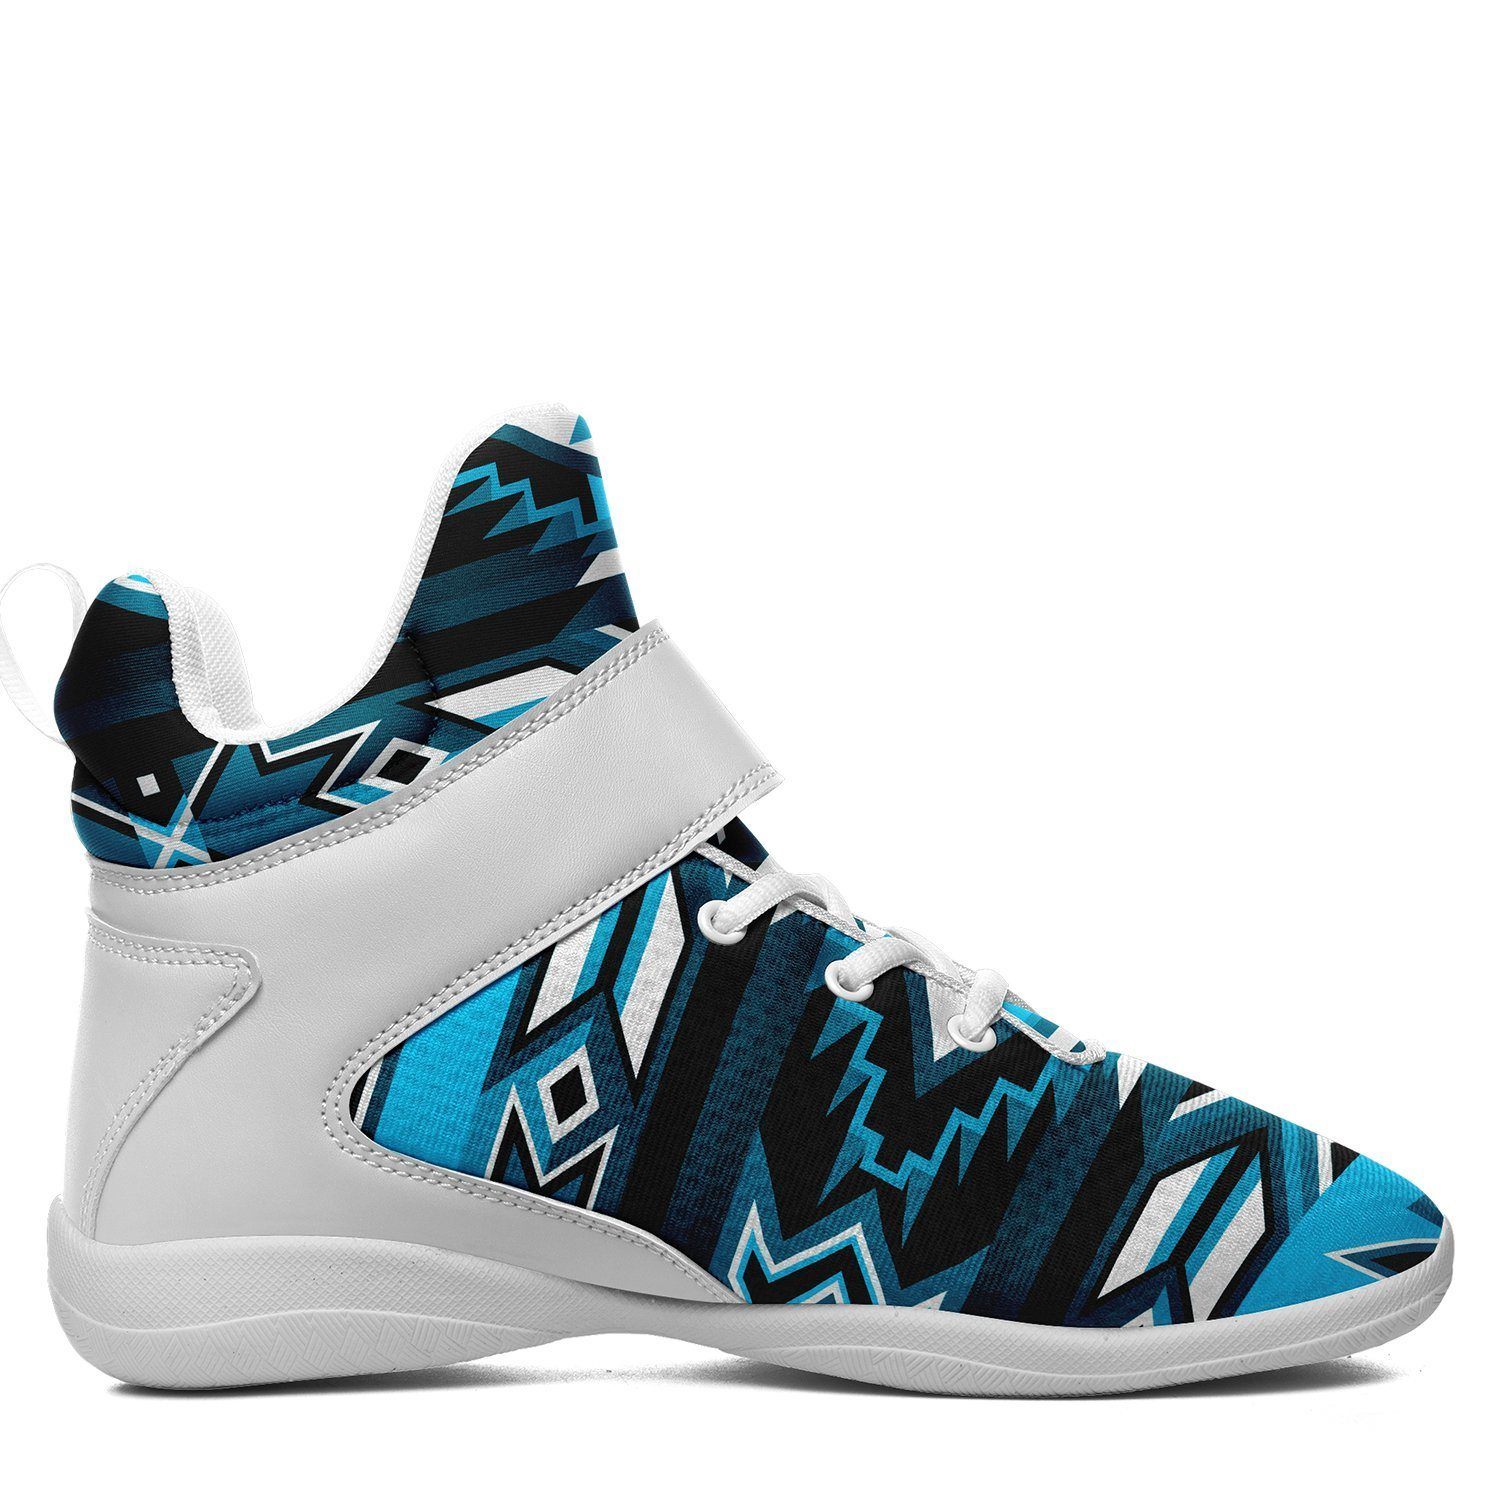 Northern Journey Ipottaa Basketball / Sport High Top Shoes - White Sole 49 Dzine 